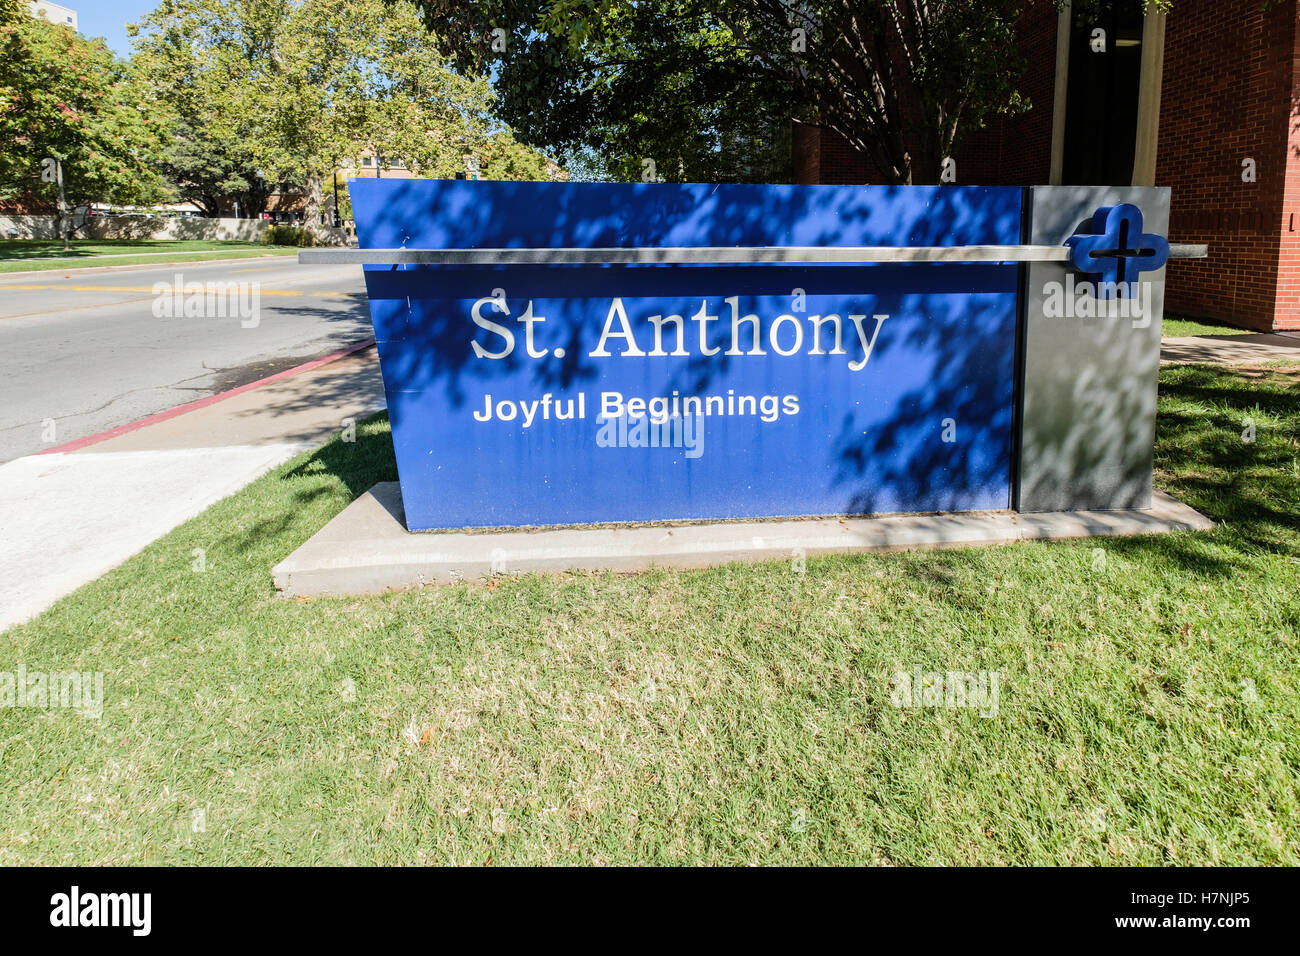 A  monument sign for St. Anthony hospital's Joyful Beginnings, a childbirth center in Oklahoma City, Oklahoma, USA. Stock Photo